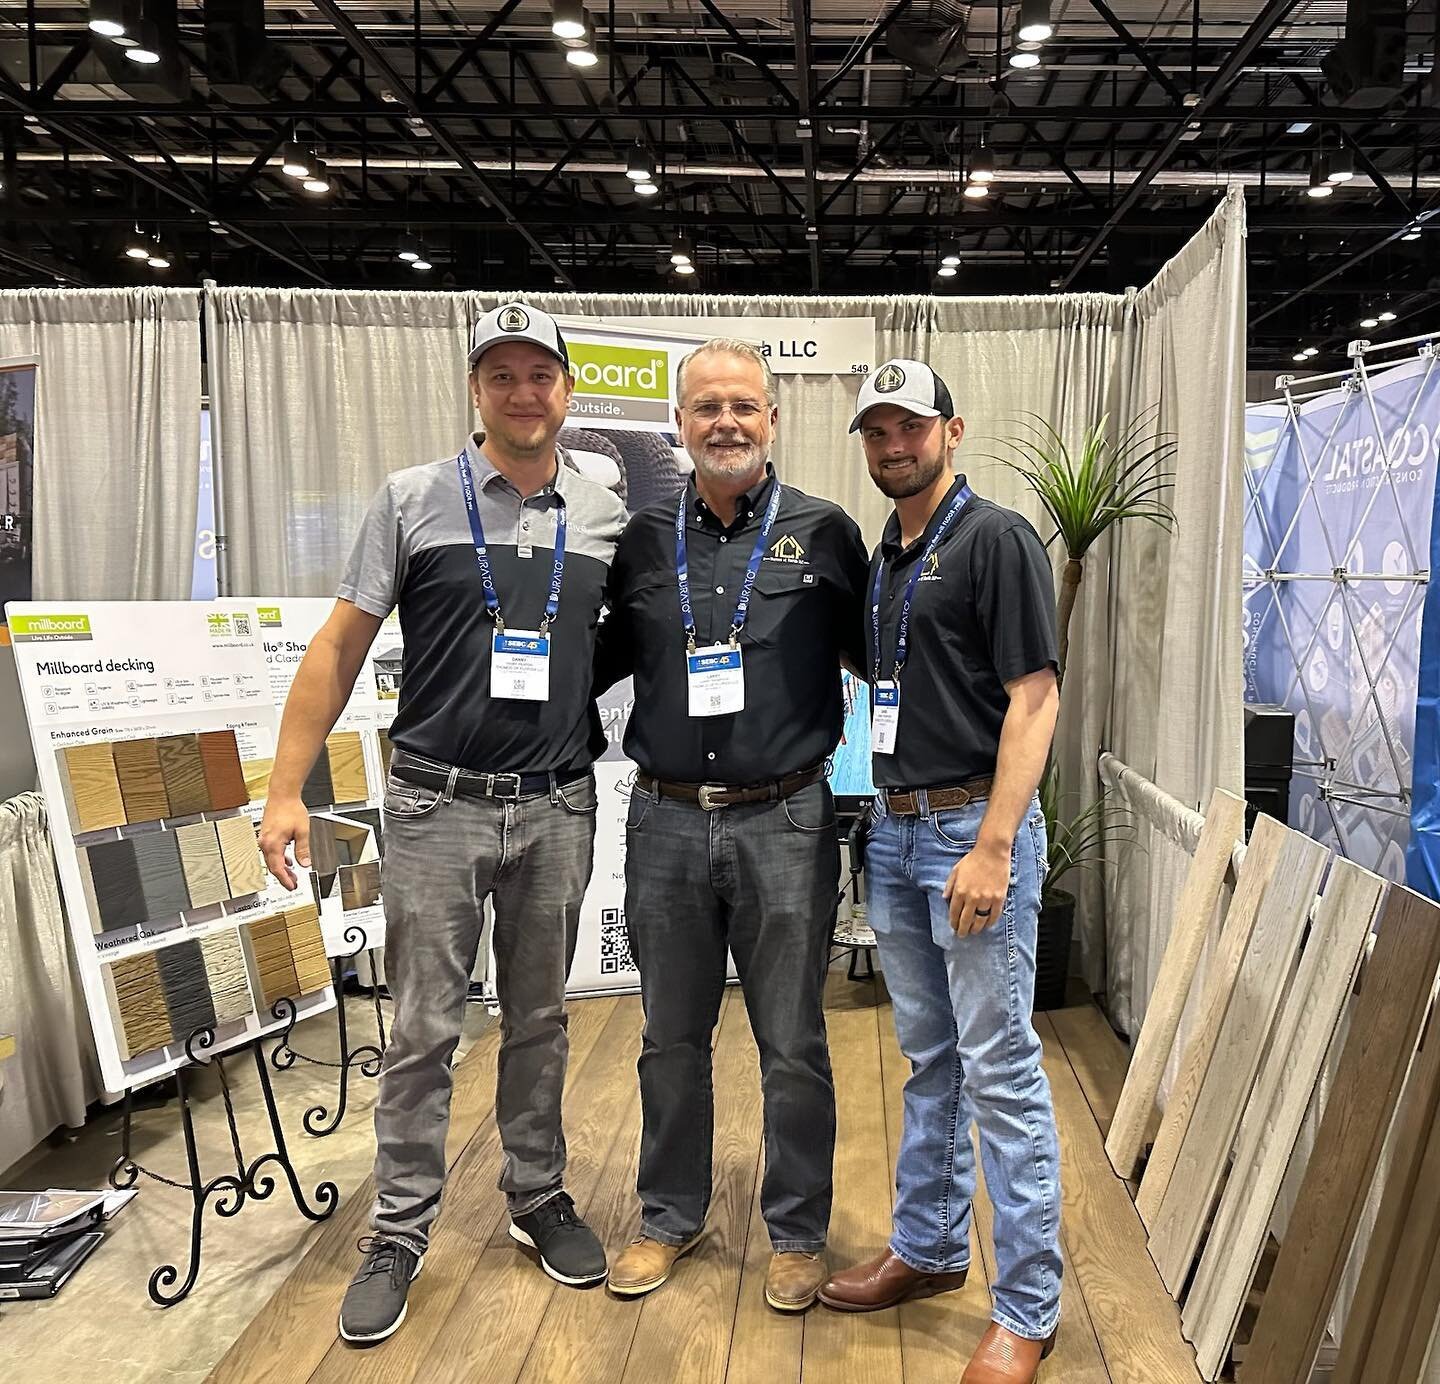 A successful second day at @southeastbuildingconference 👏🏻 We loved meeting new faces and learning new things! If you stopped by our booth and would like some more info, give us a call at (813)&nbsp;530-5665 or email us at info@thomcofl.com!